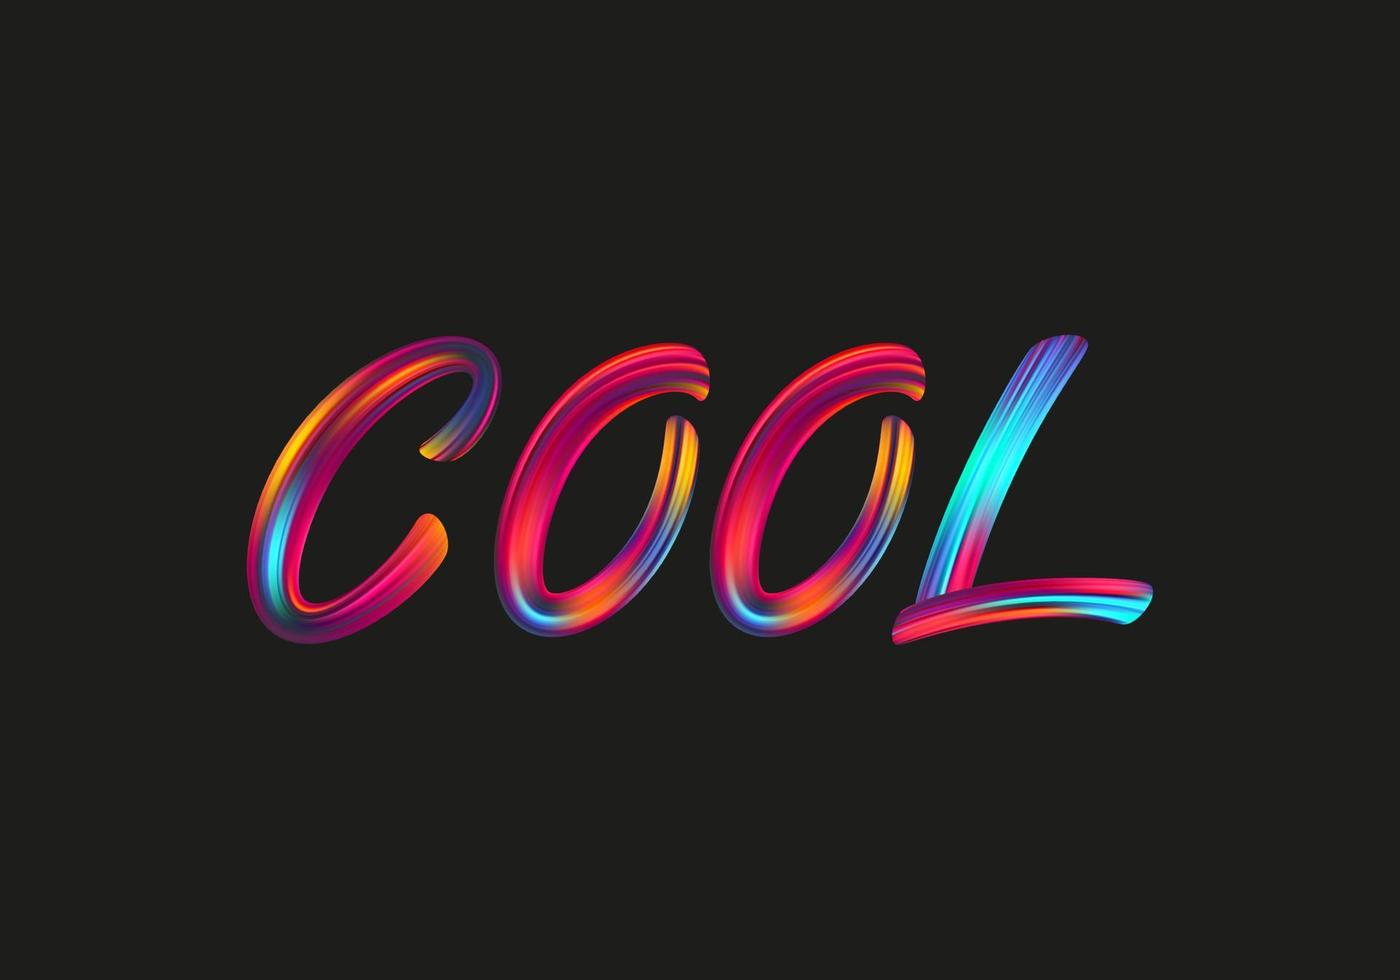 Cool lettering on black background vector